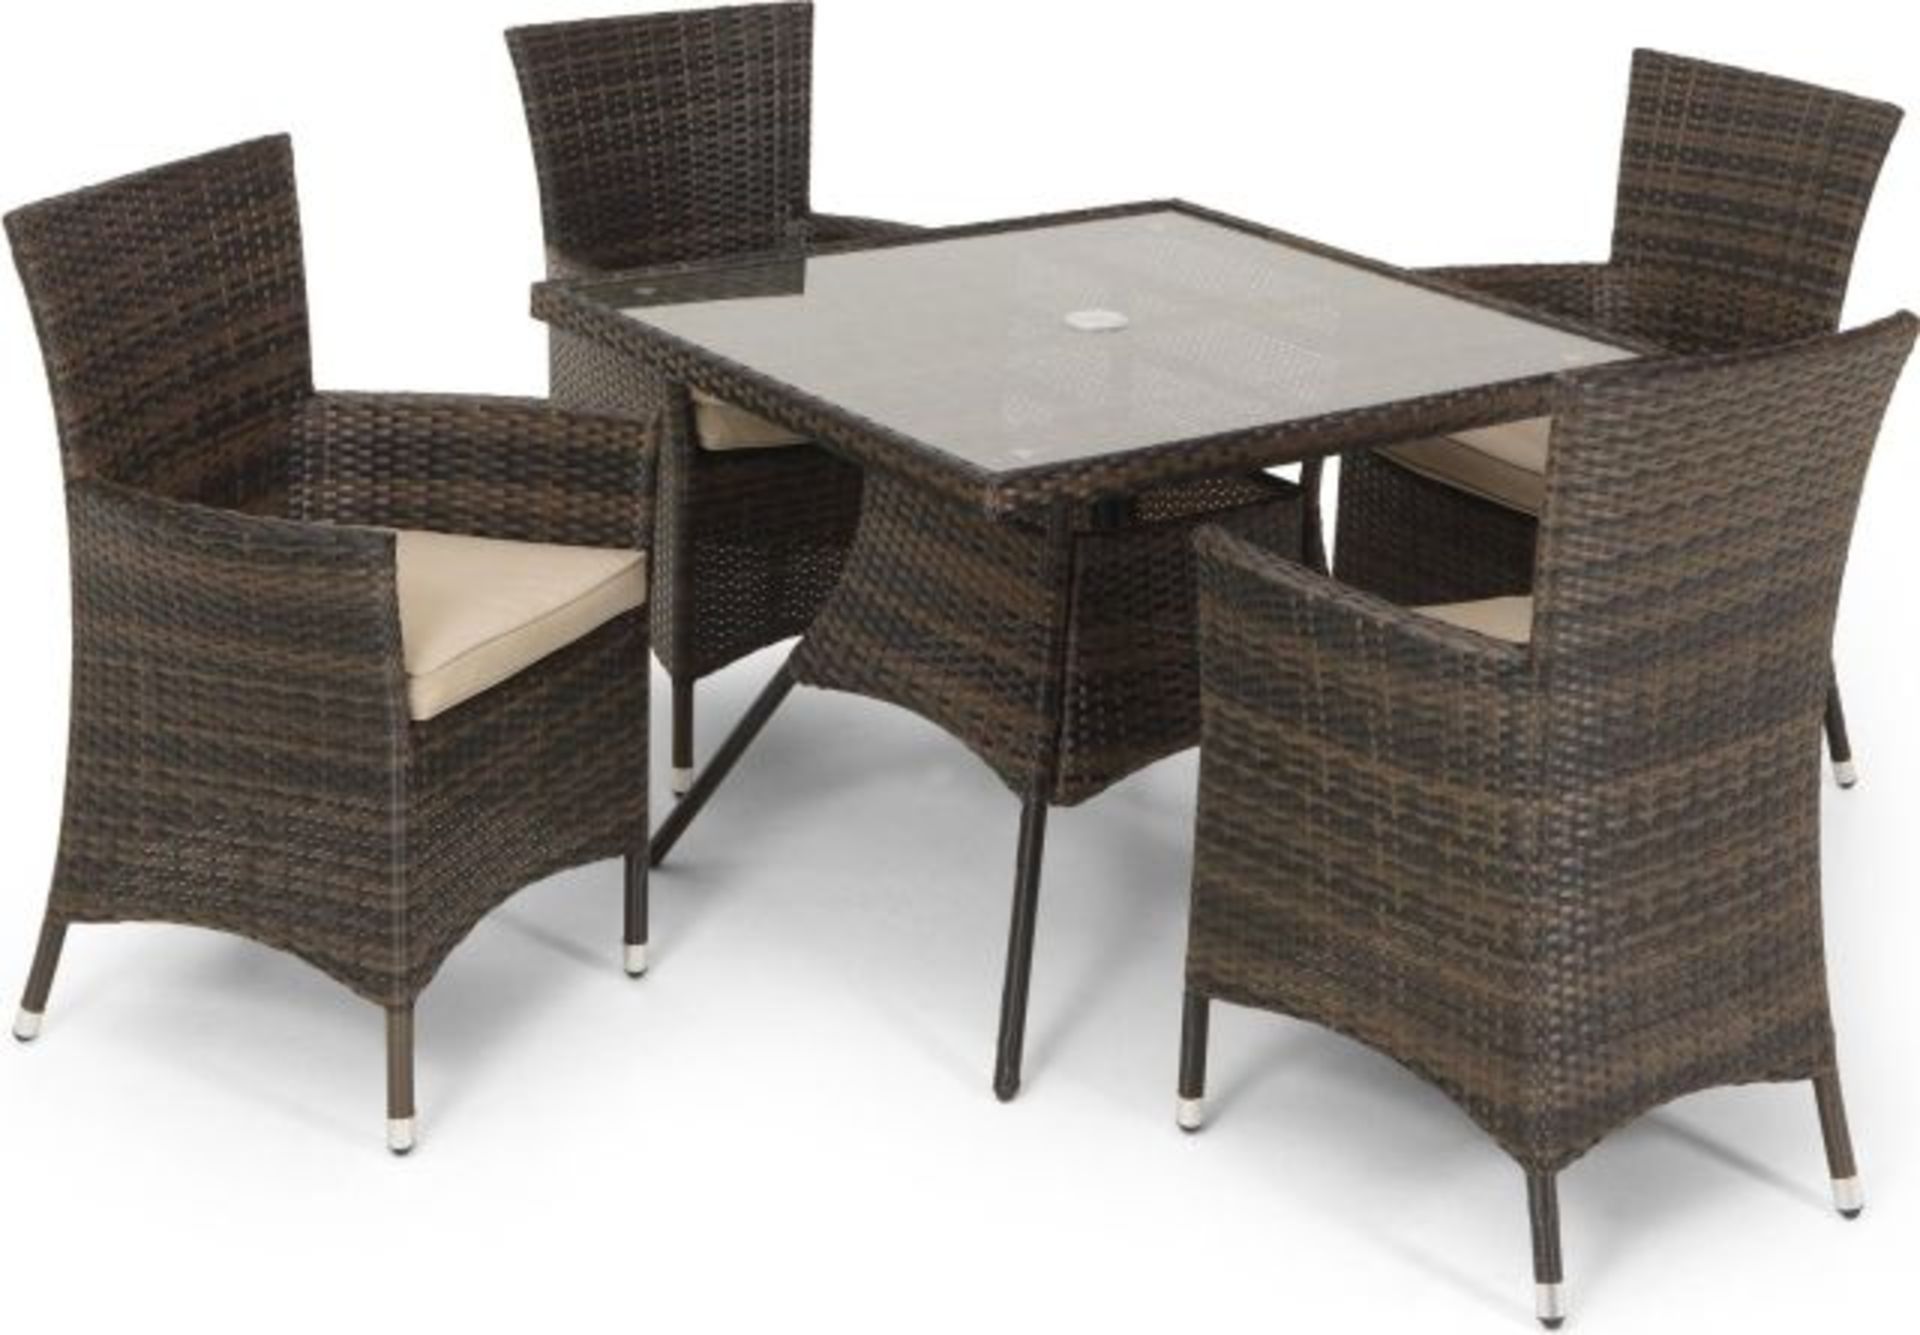 * California Square 5 Piece Patio / Dining set online Sale price £599. Brand New & Boxed /